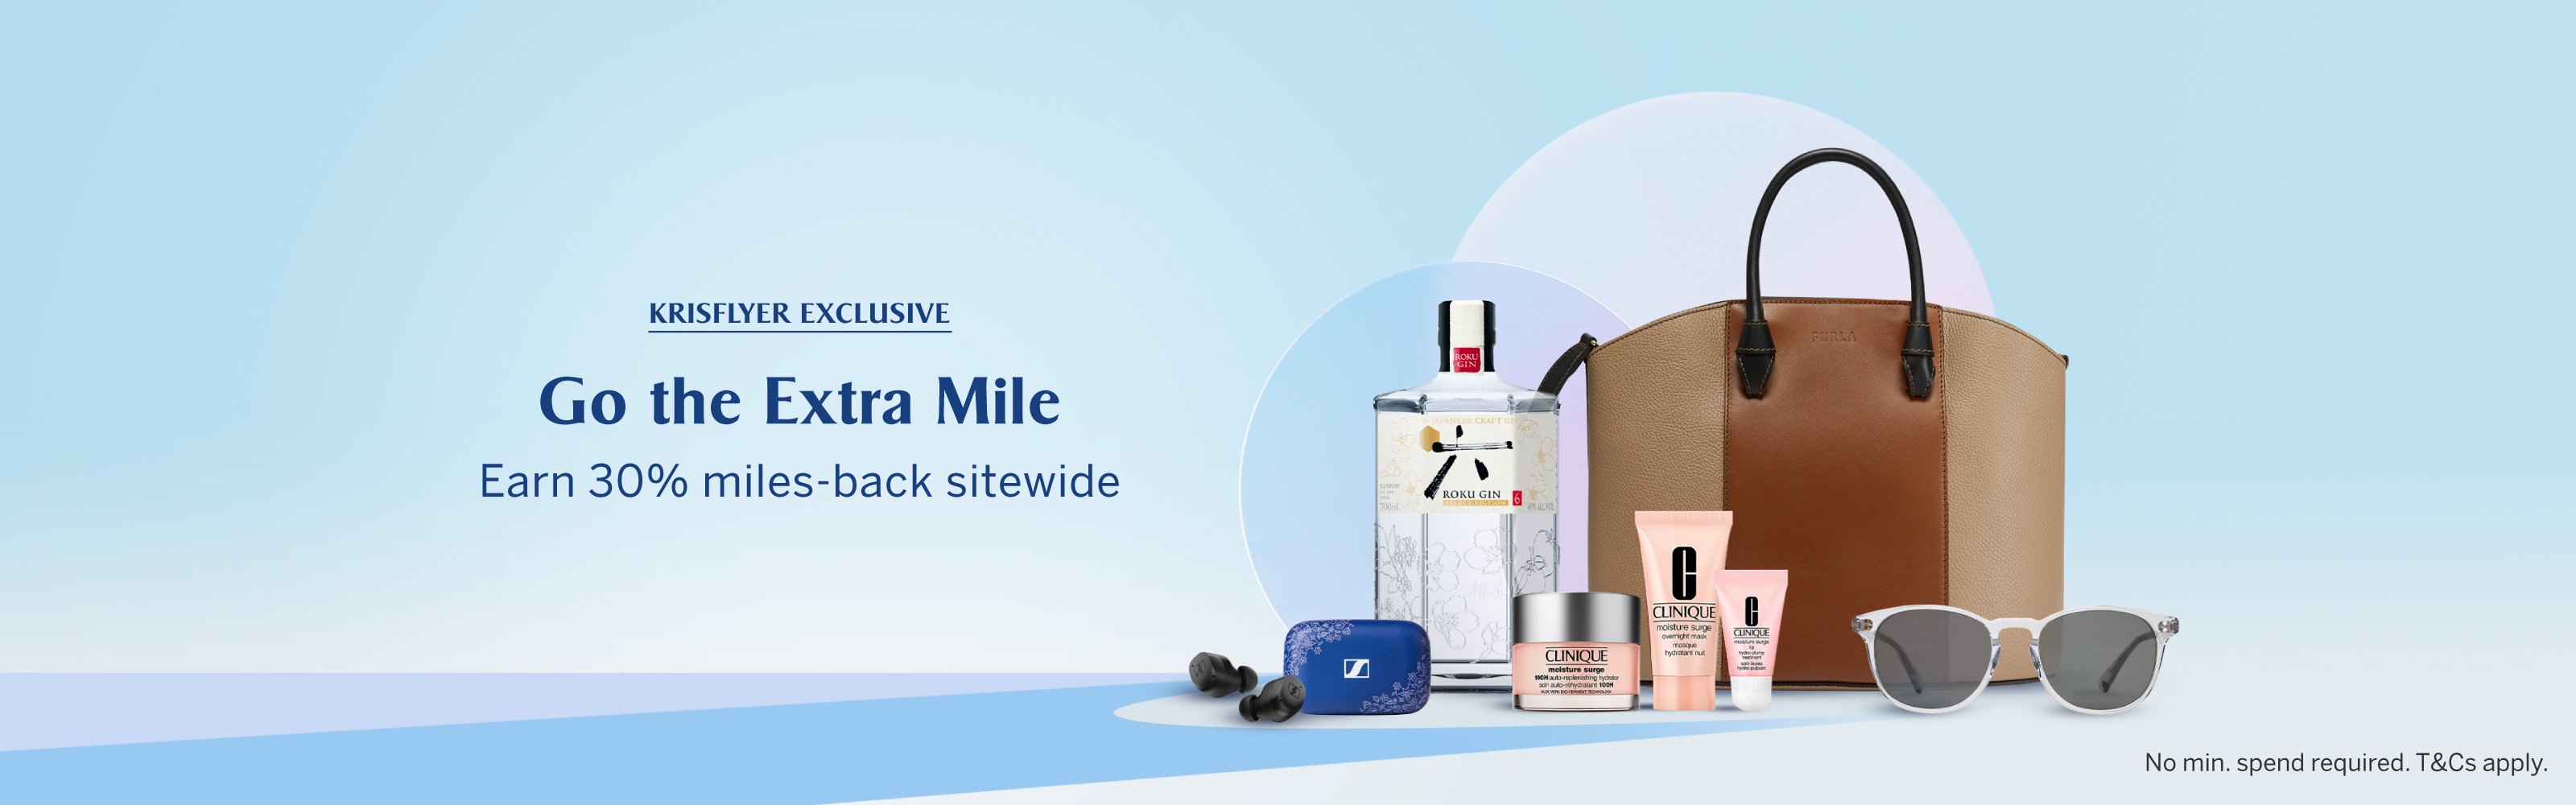 Go the Extra Mile - Earn 30% miles-back sitewide